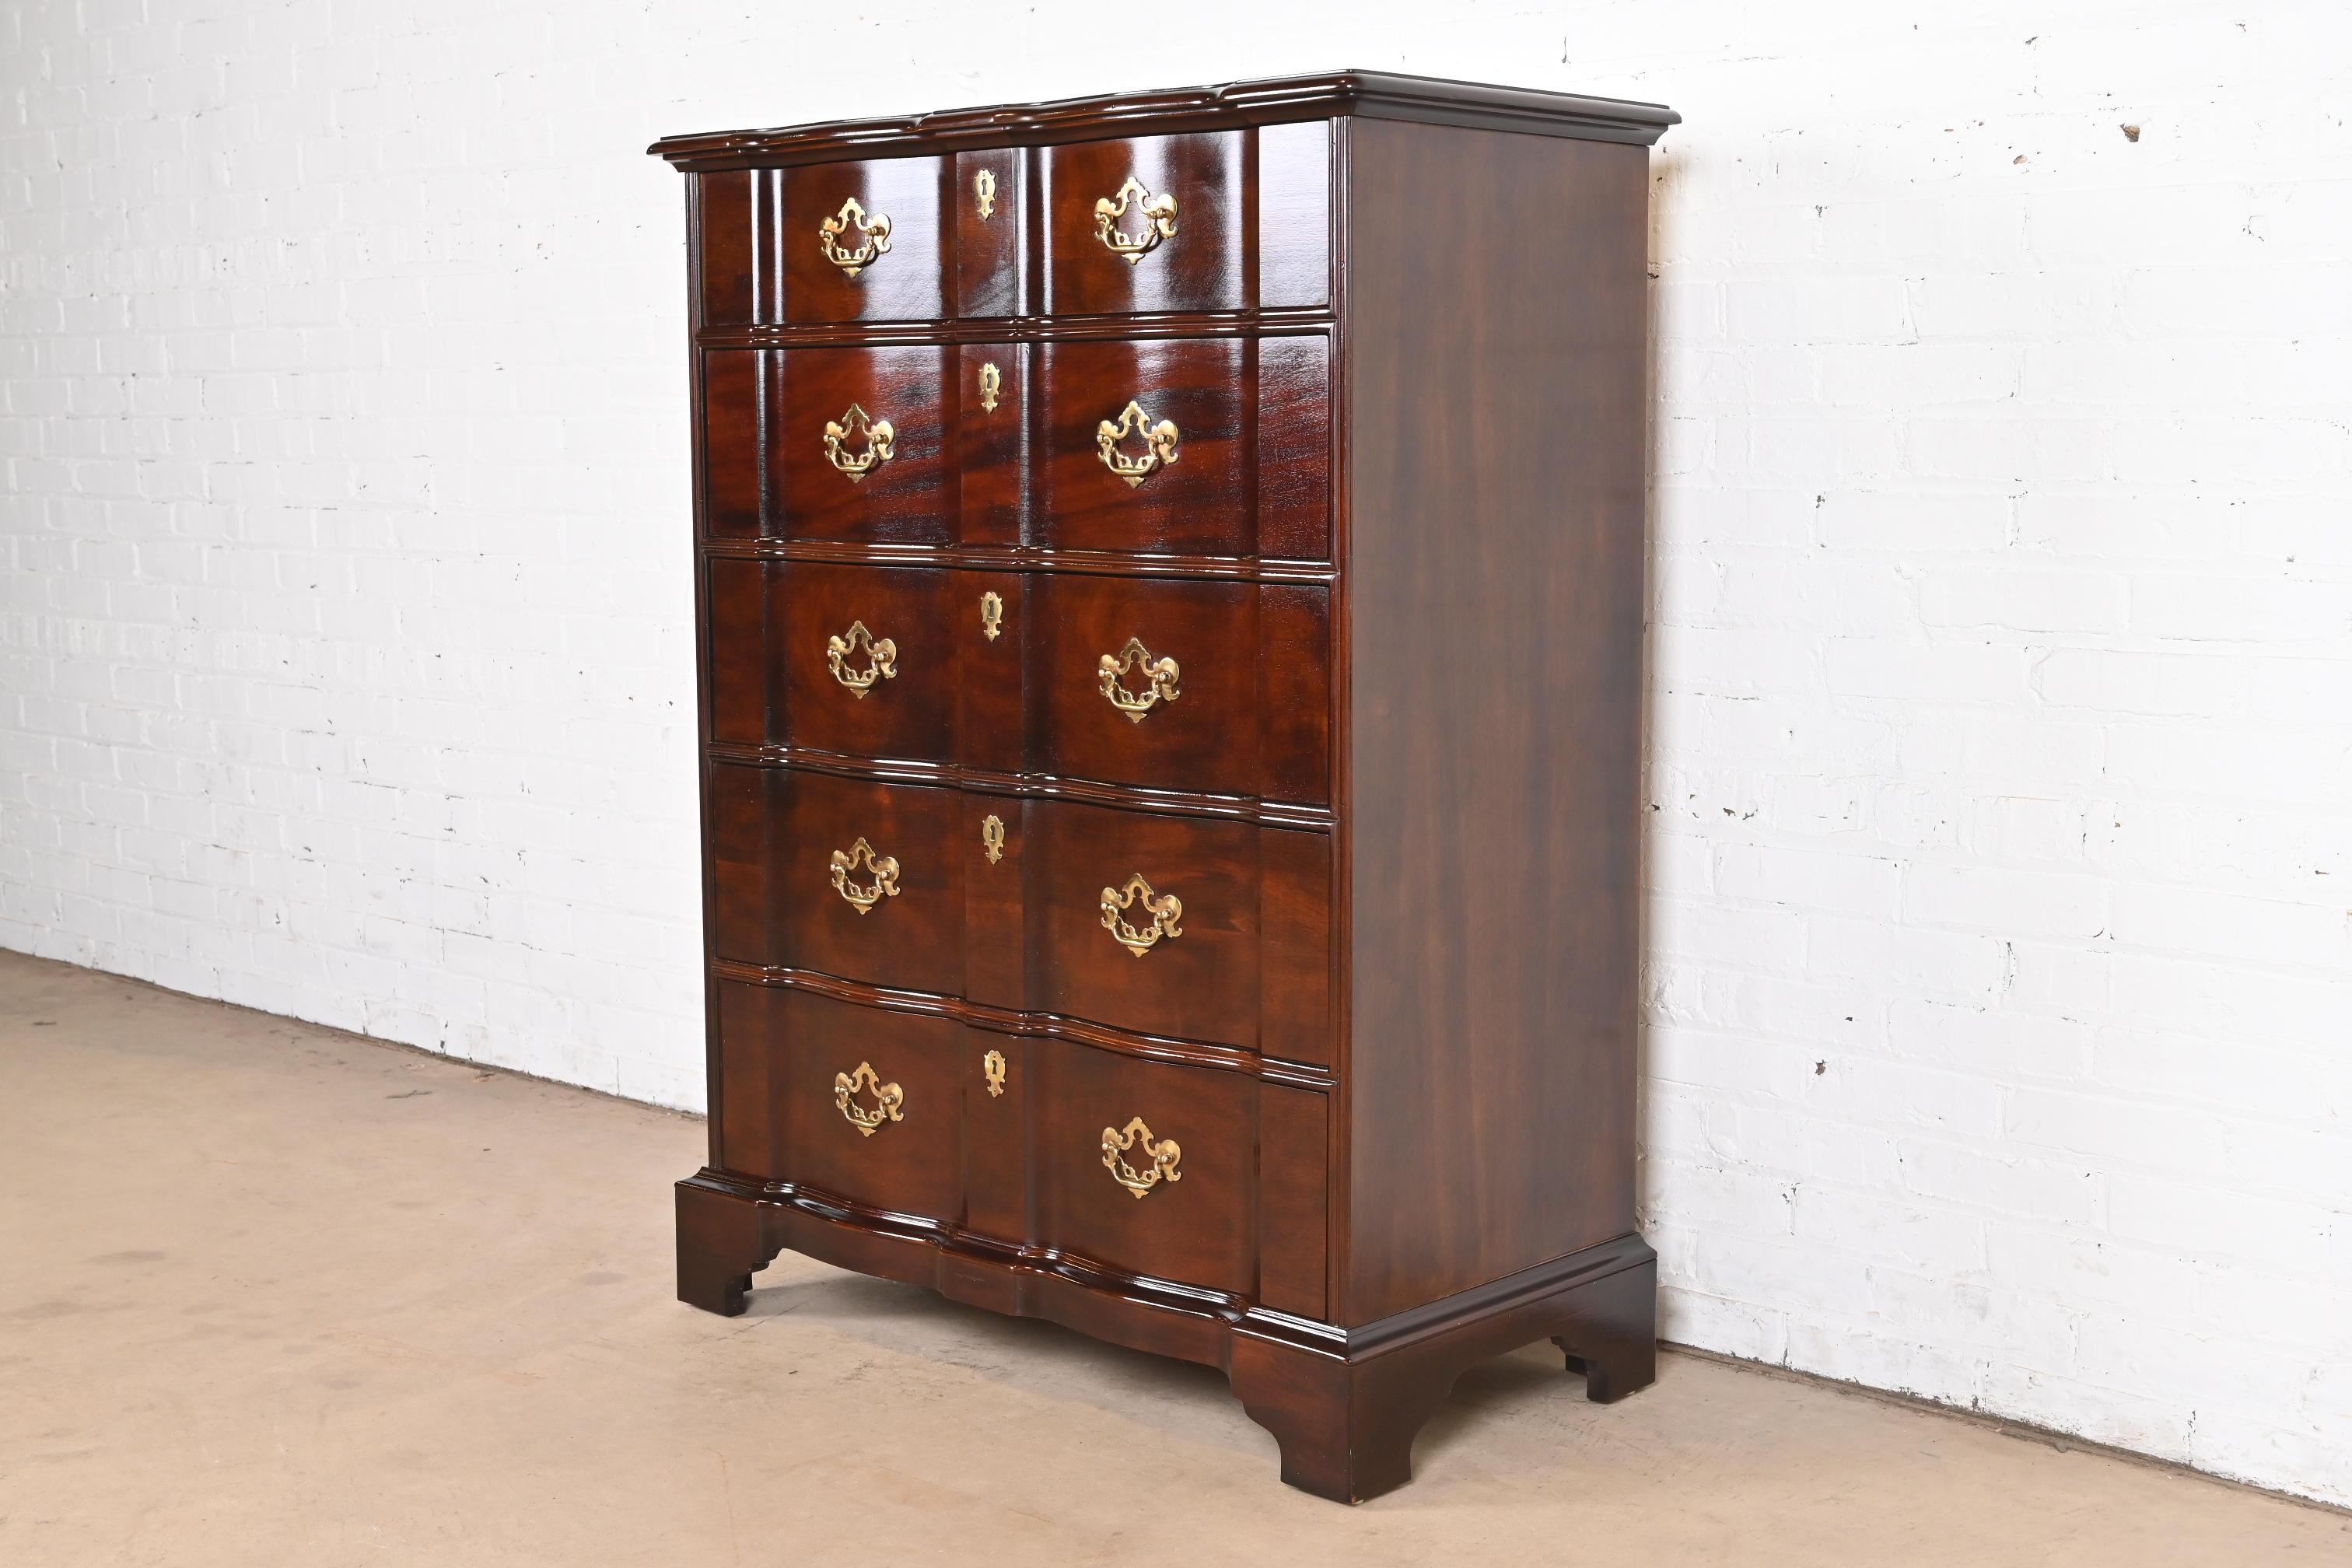 Henredon Georgian Solid Mahogany Block Front Highboy Dresser In Good Condition For Sale In South Bend, IN